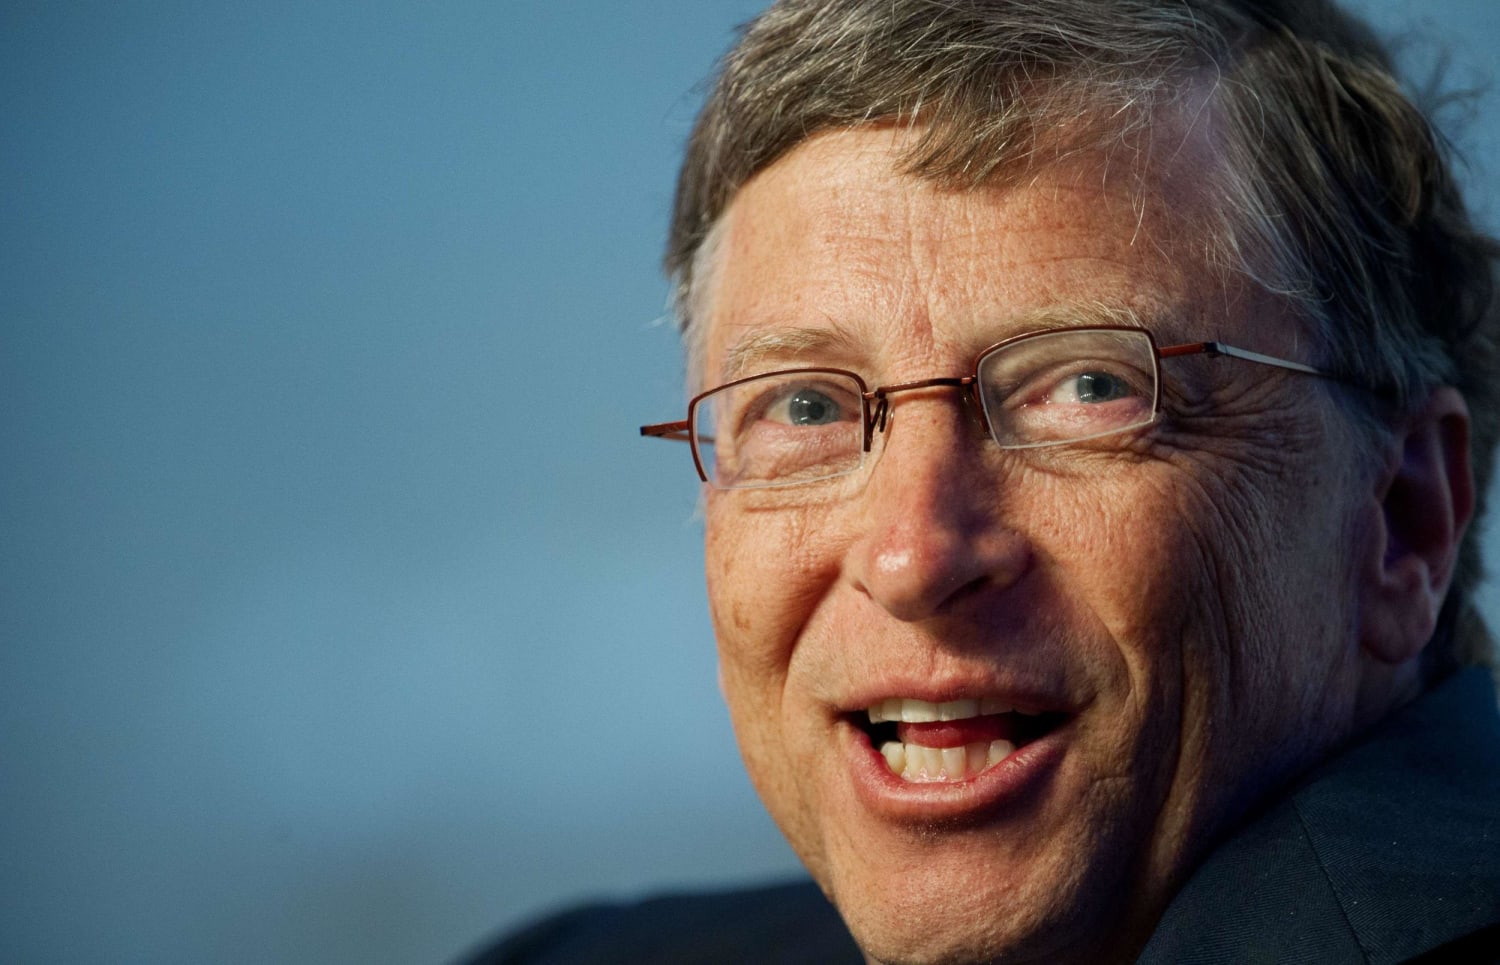 Bill Gates remains Forbes' richest man in world in 2016 list of